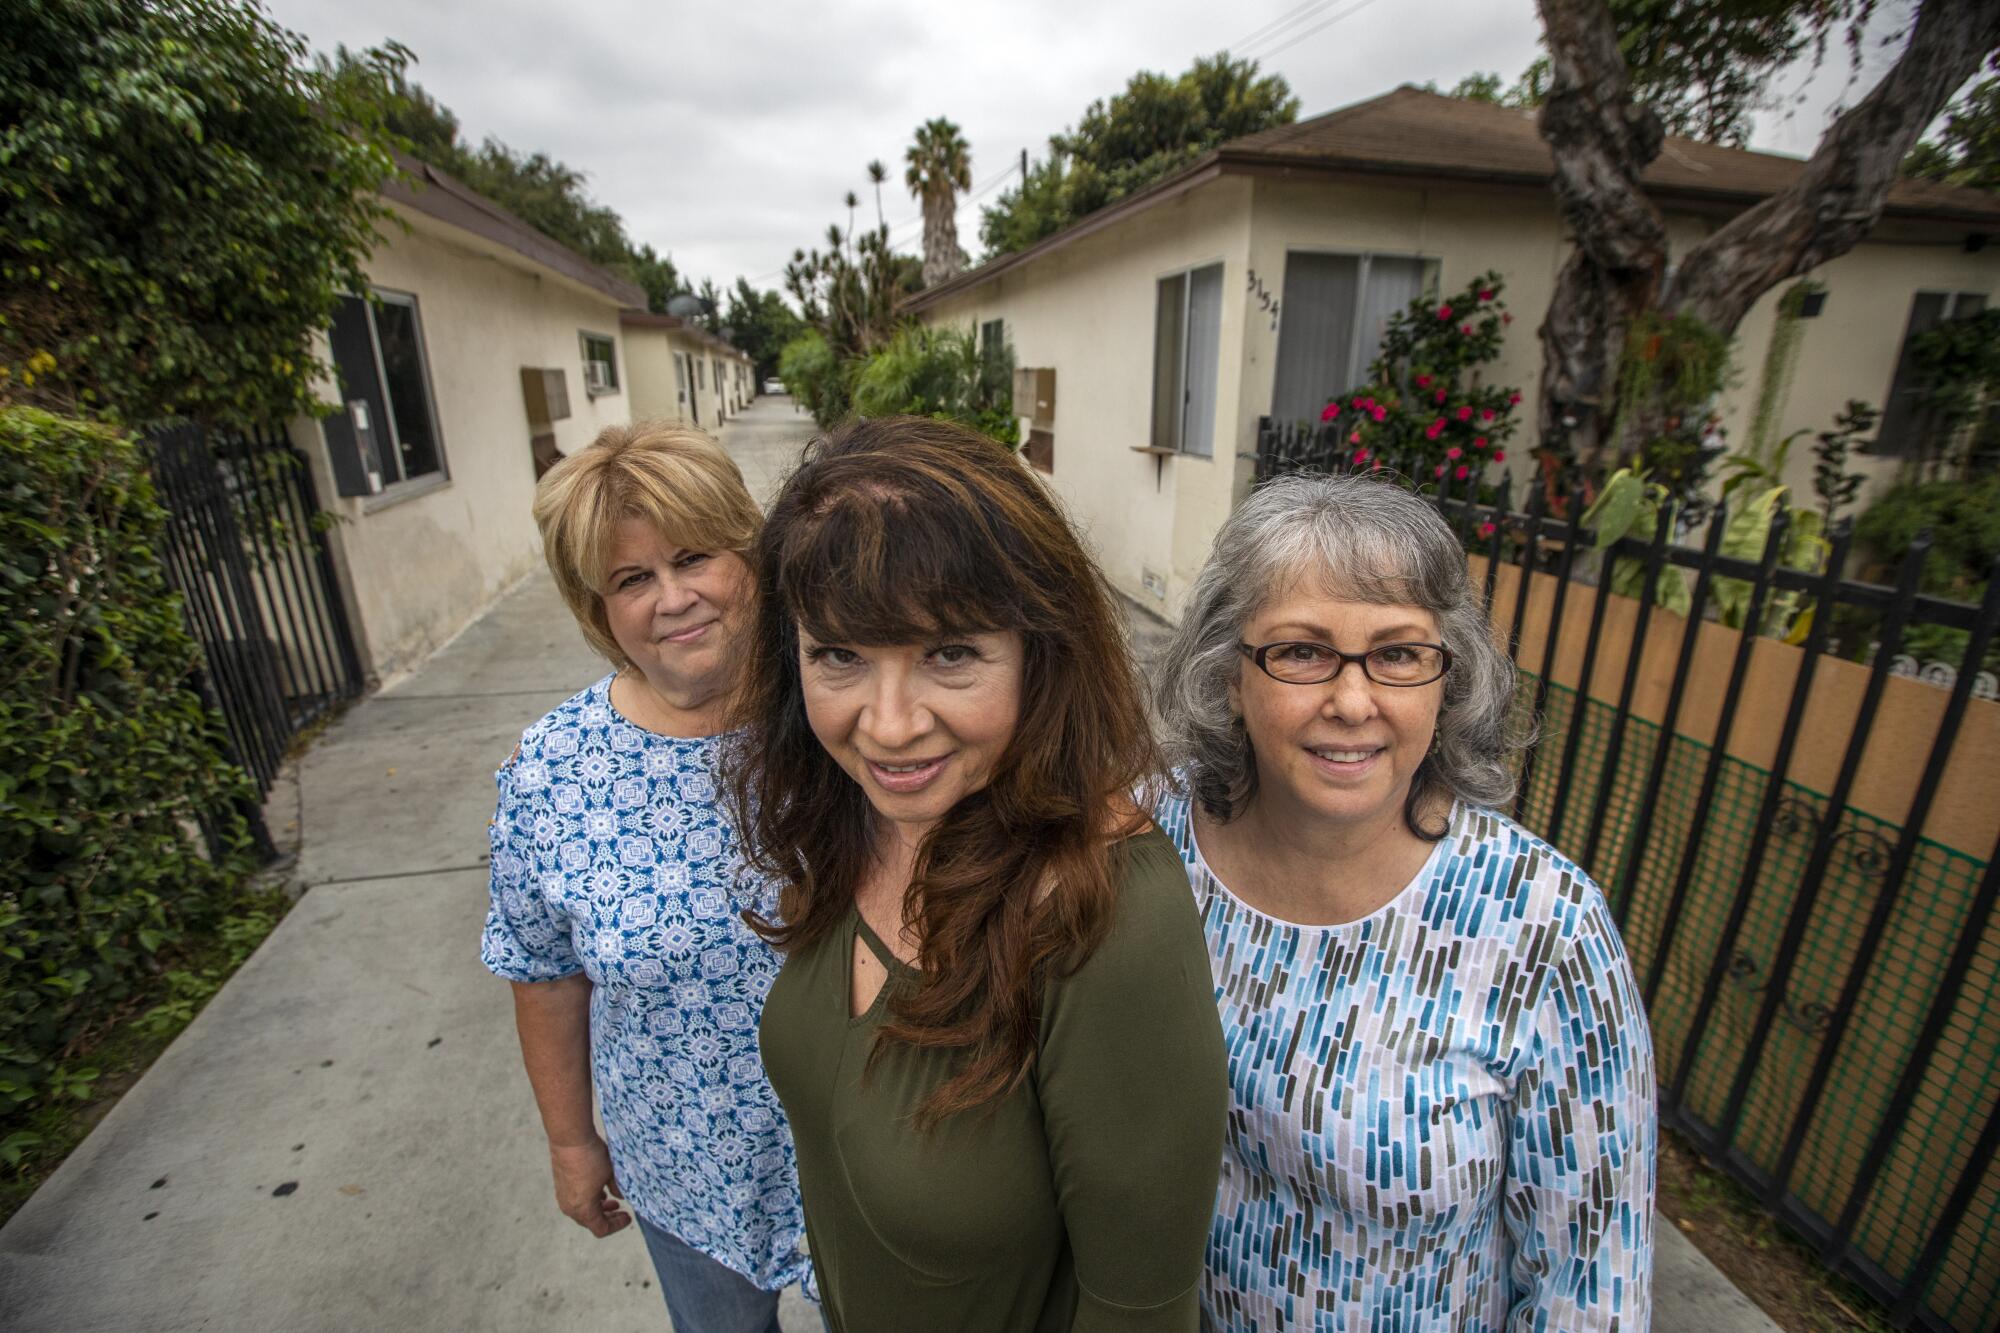 Three women stand together in a residential neighborhood